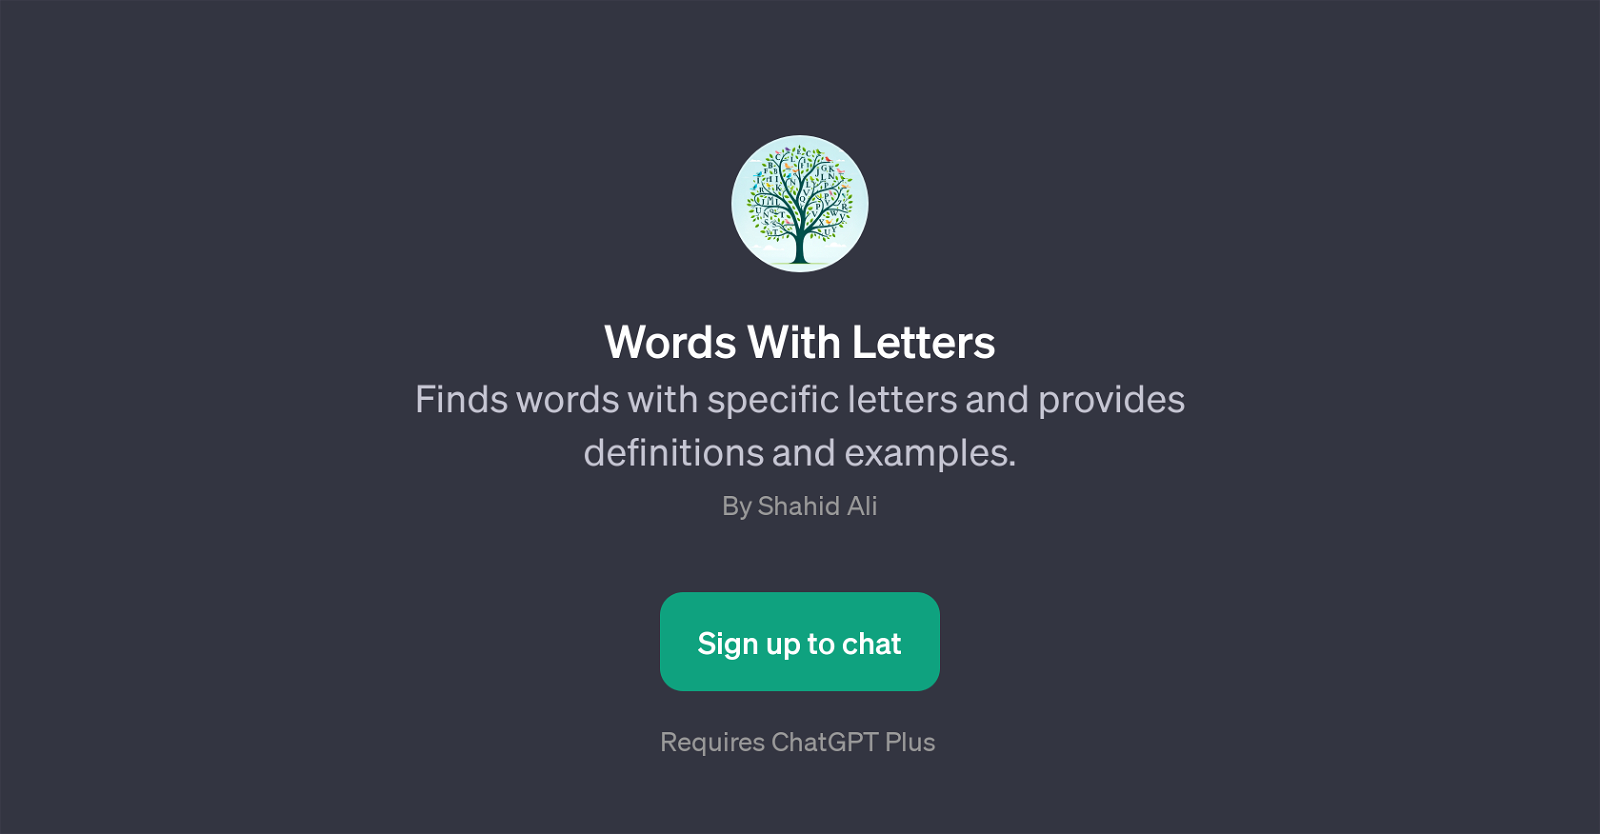 Words With Letters website